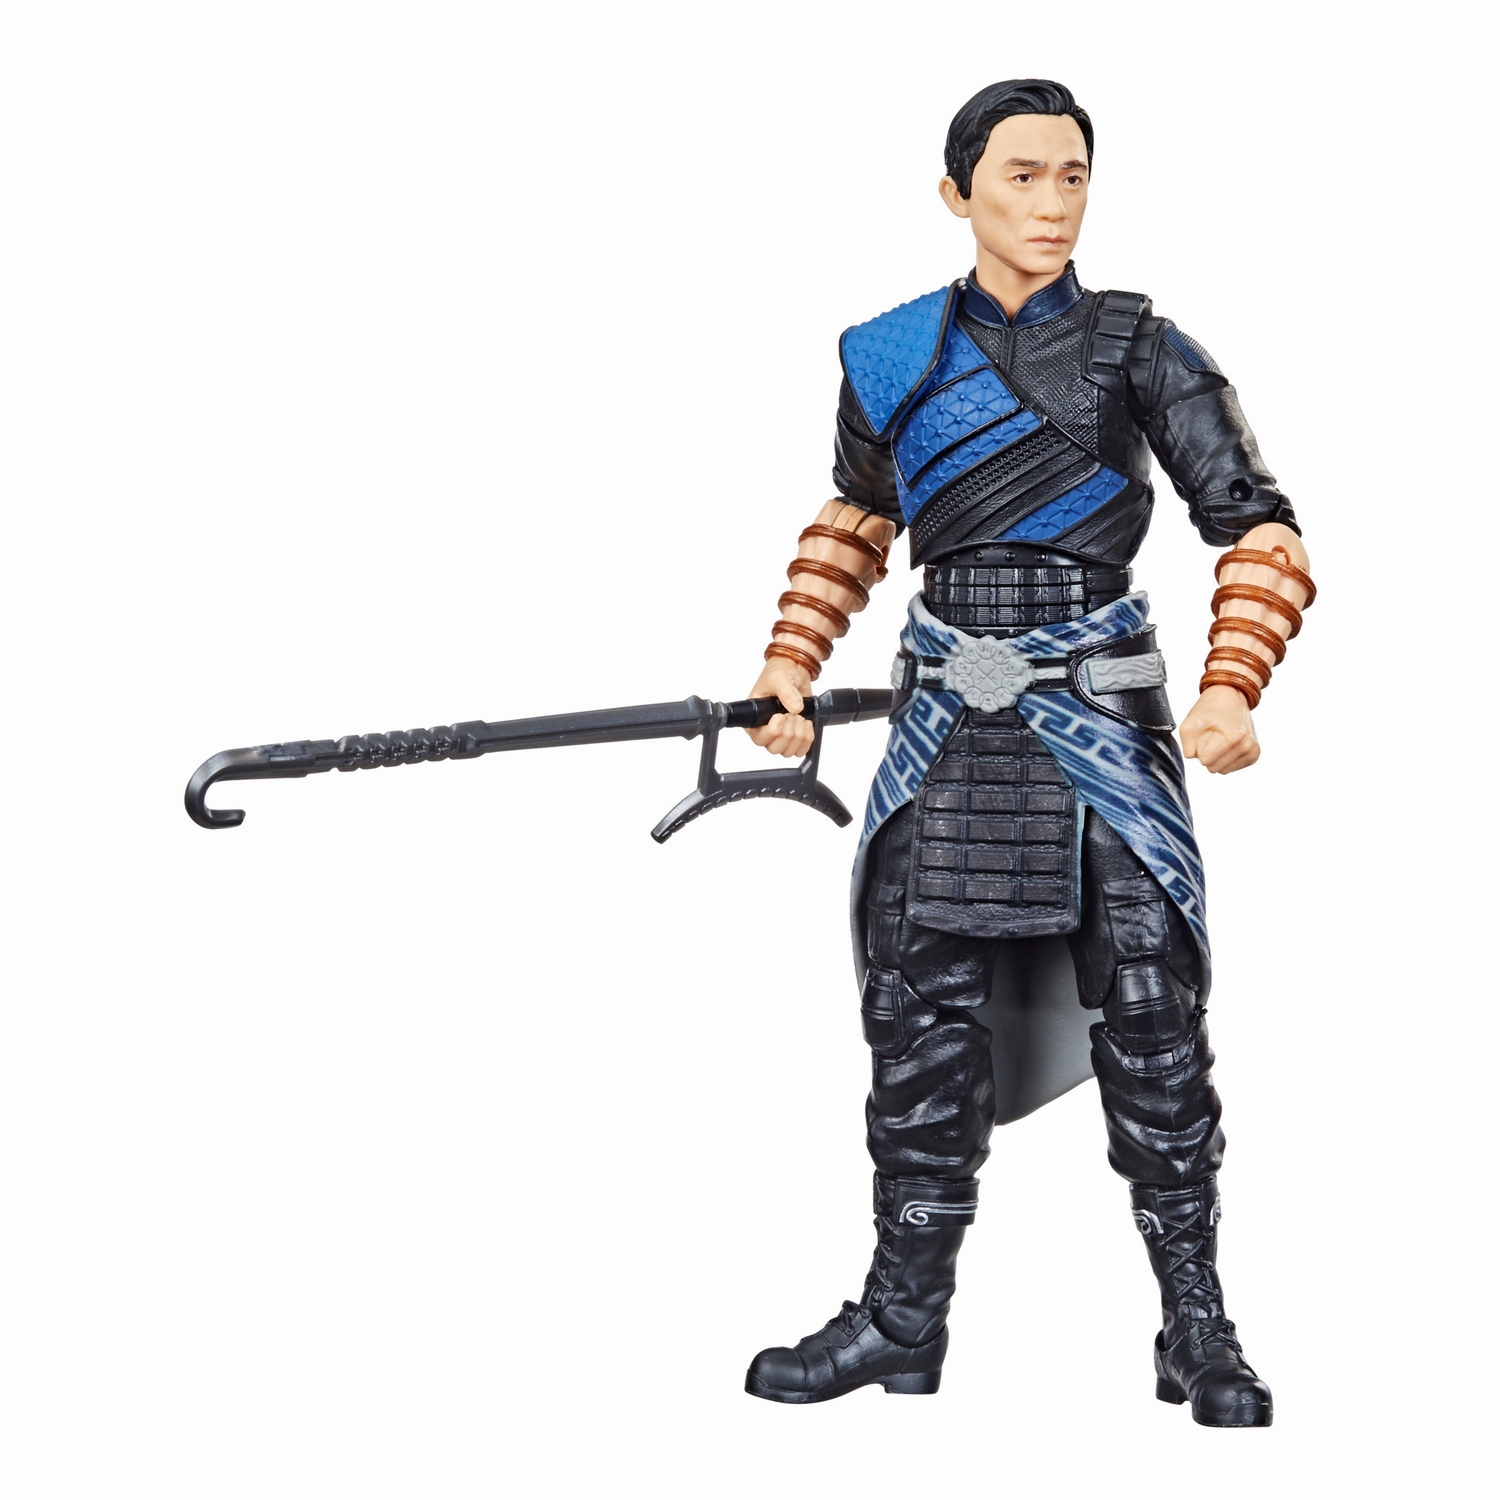 MARVEL LEGENDS SERIES 6-INCH SHANG-CHI AND THE LEGEND OF THE TEN RINGS - Wenwu oop5.jpg